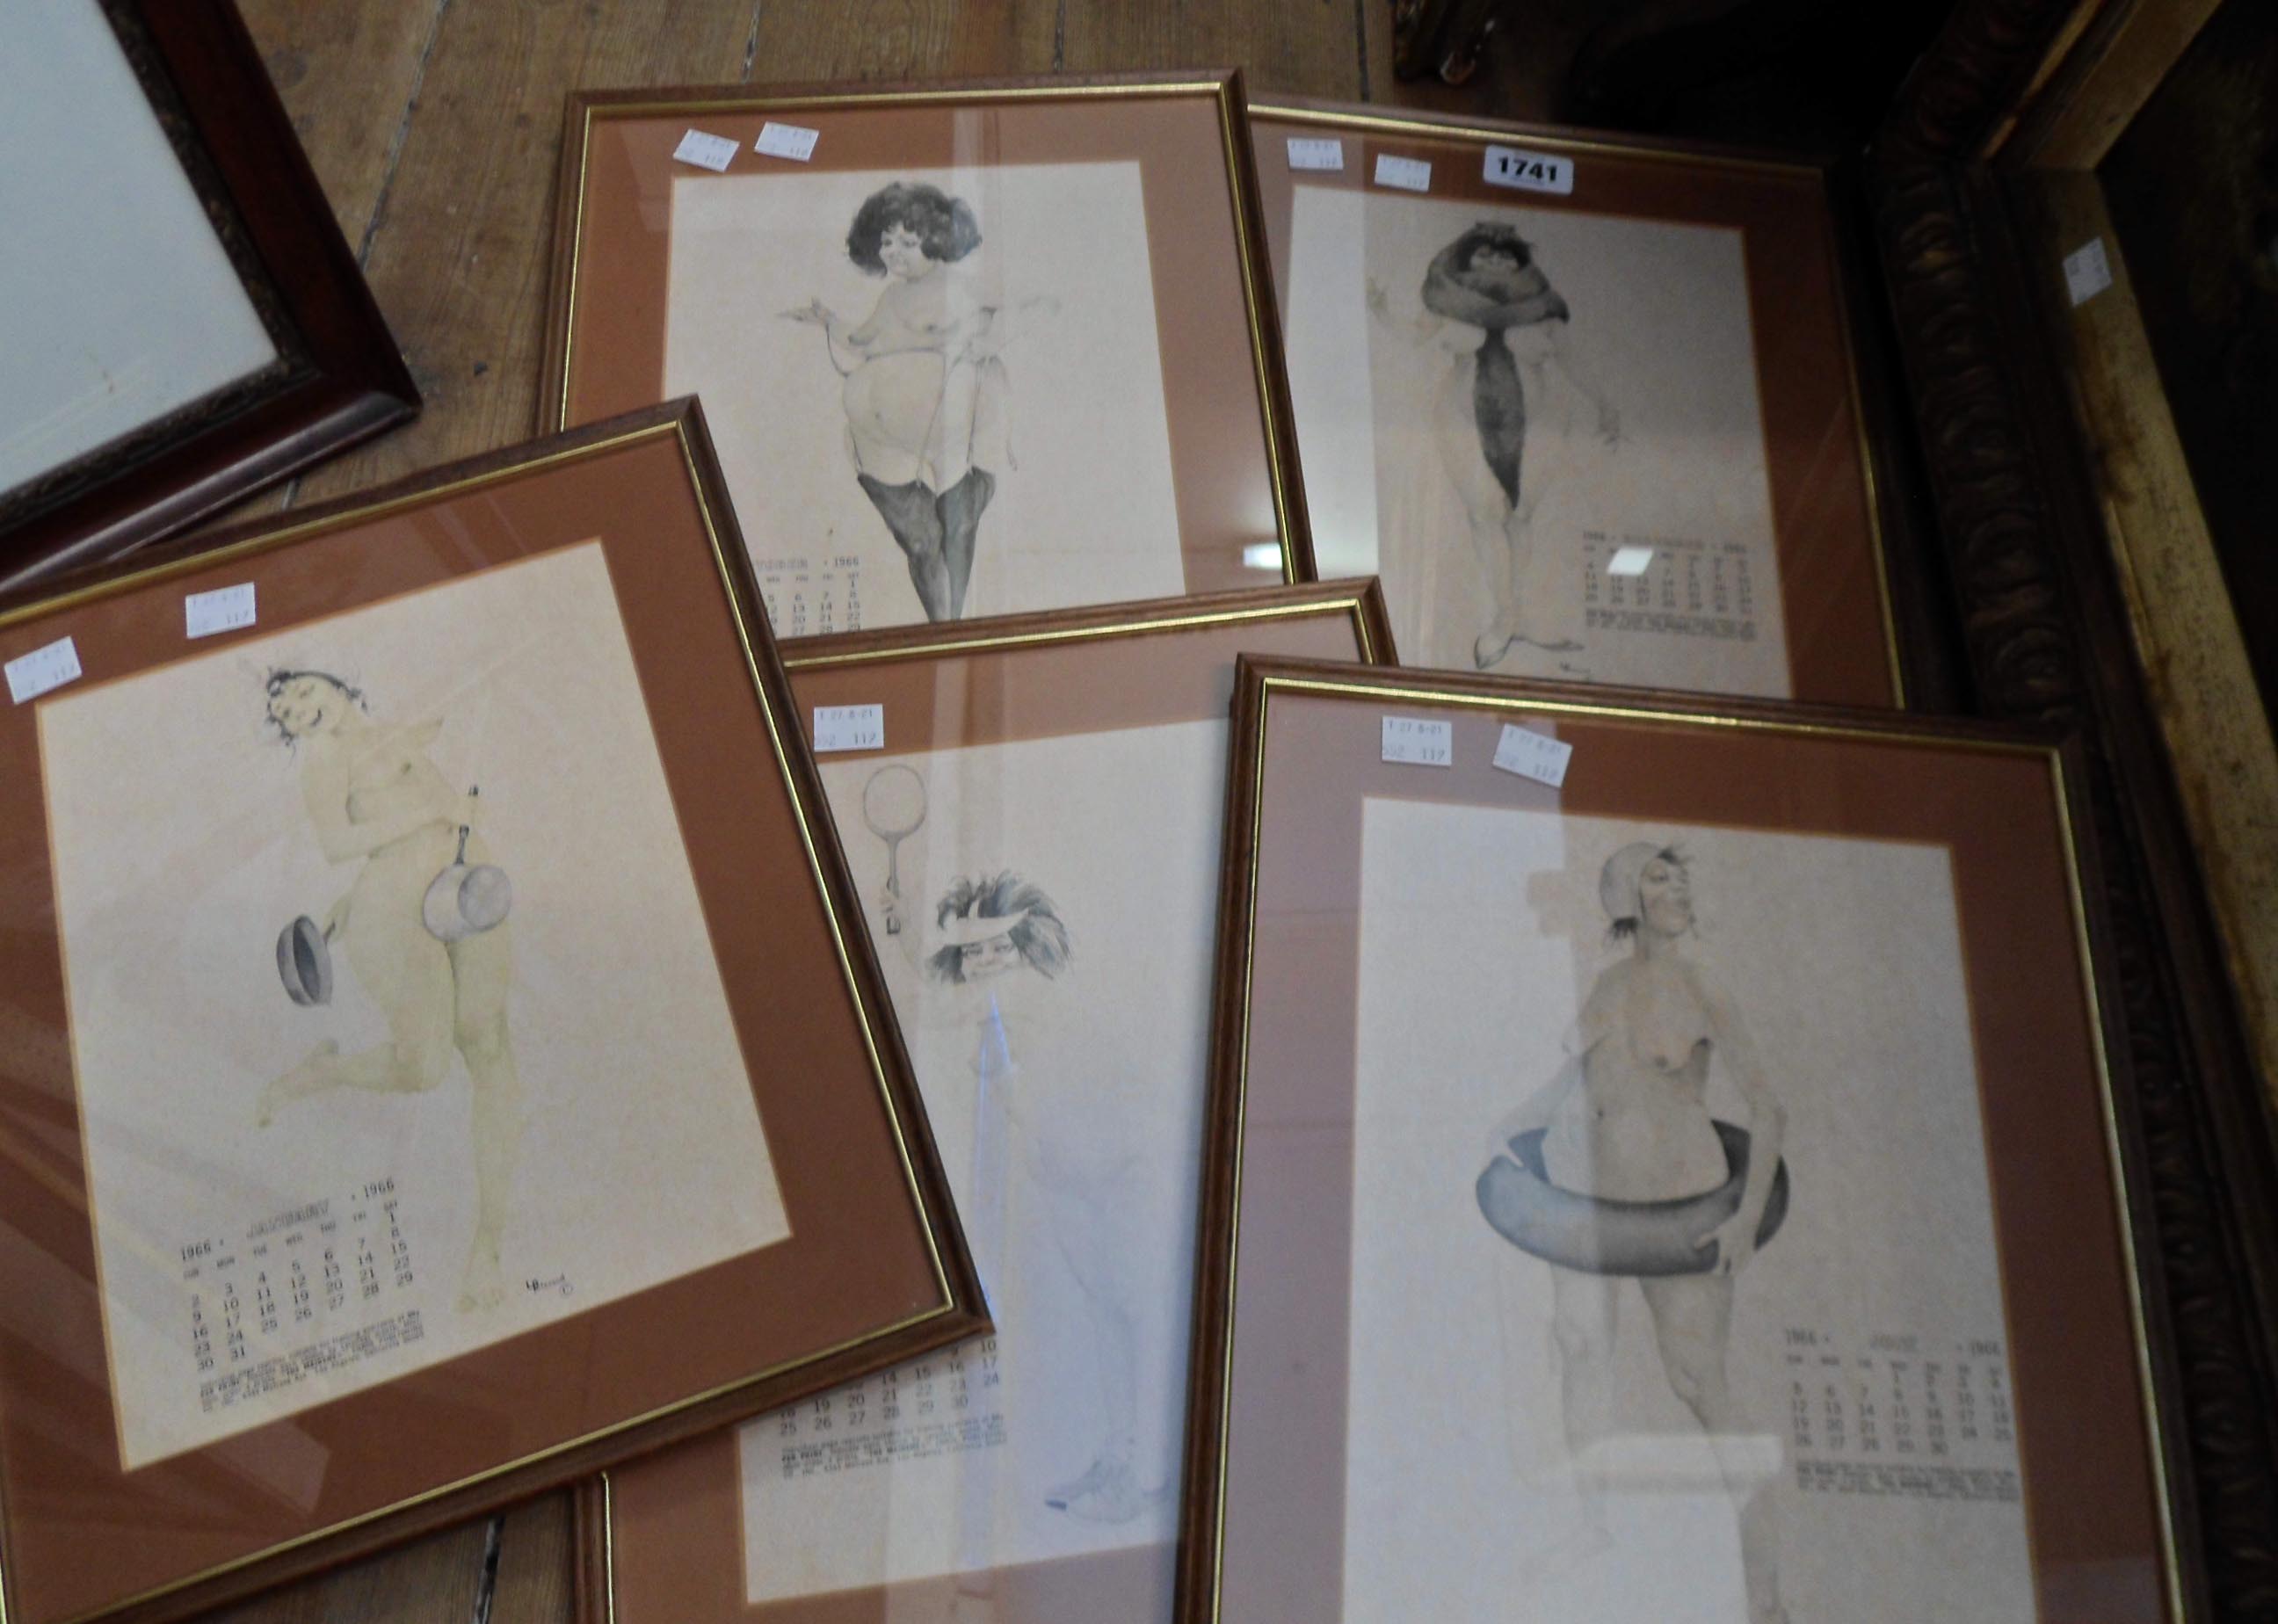 L. Peterson: ten matching framed risqué 1966 calendar prints - July and August missing - some